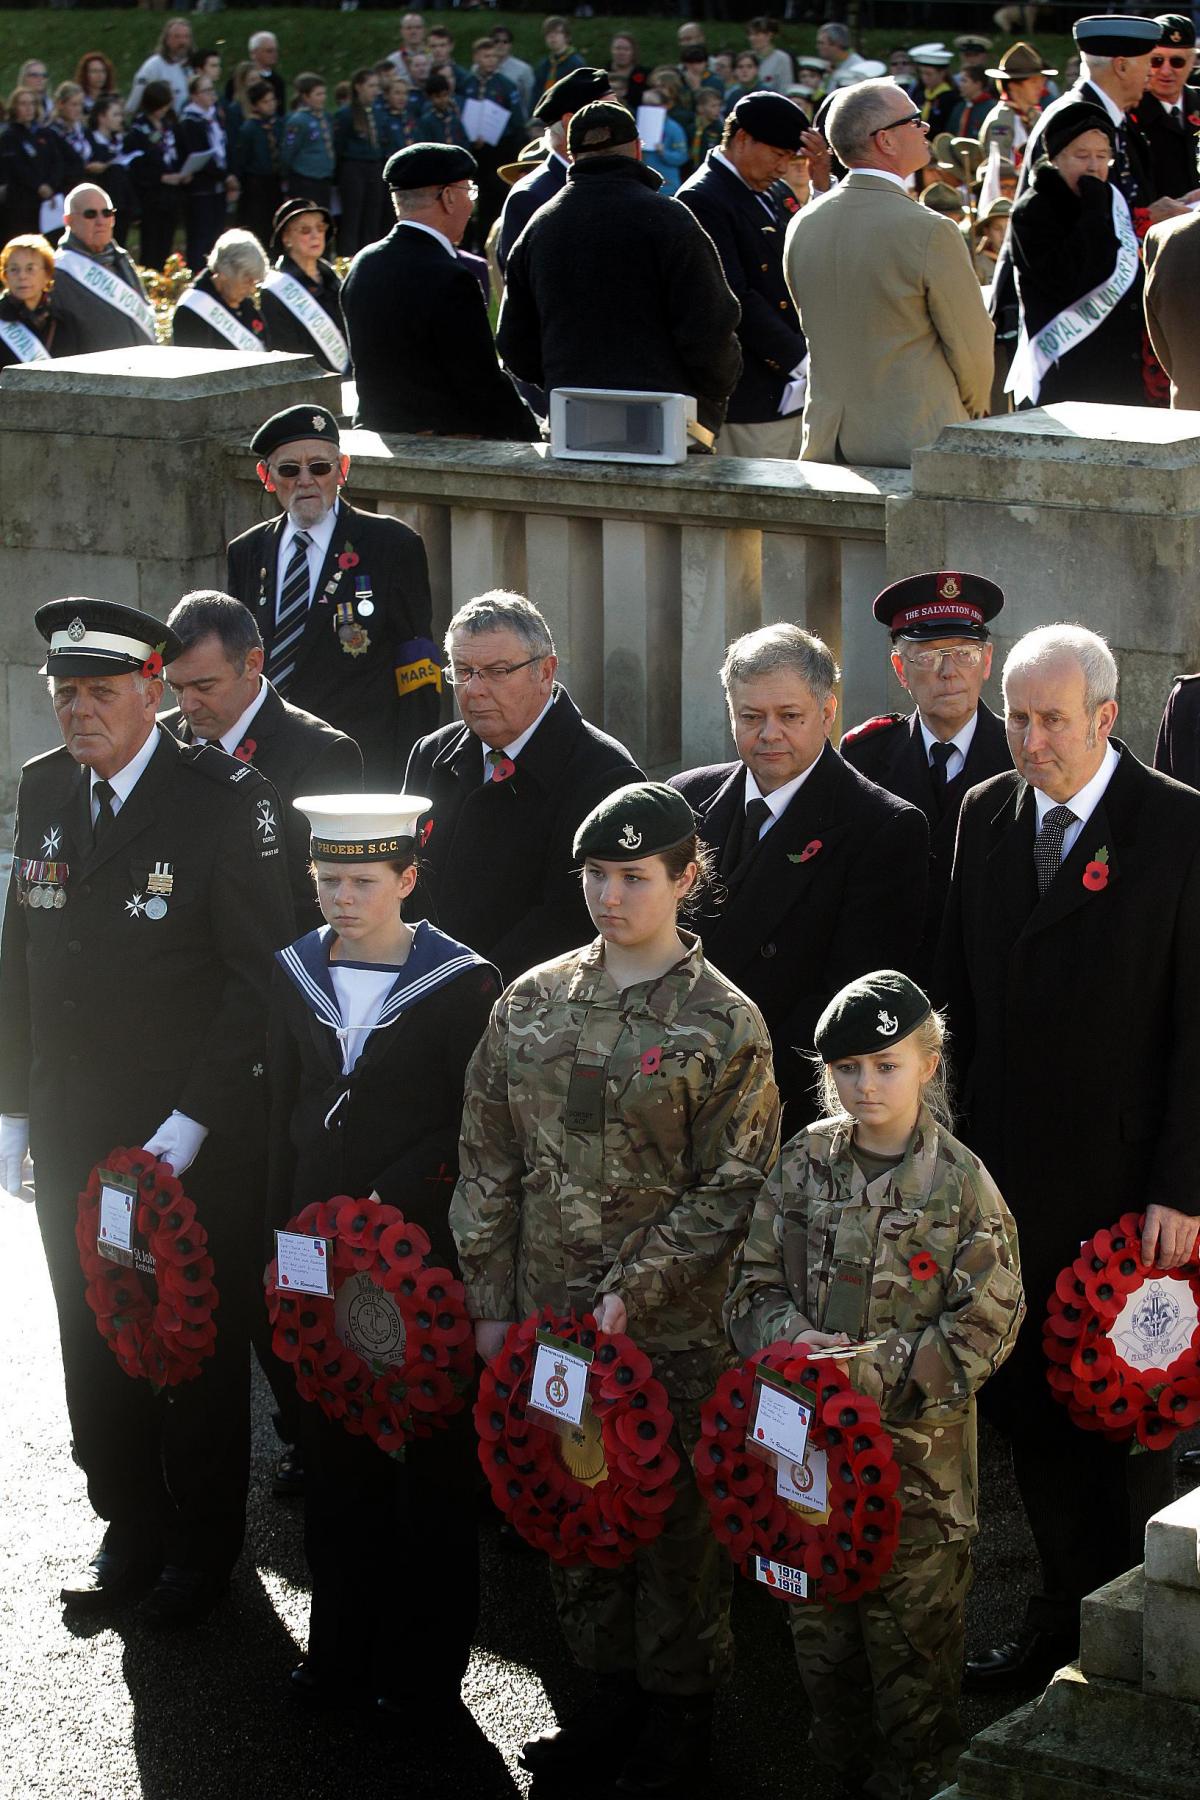 Pictures from Bournemouth Remembrance Sunday service by Sally Adams. 